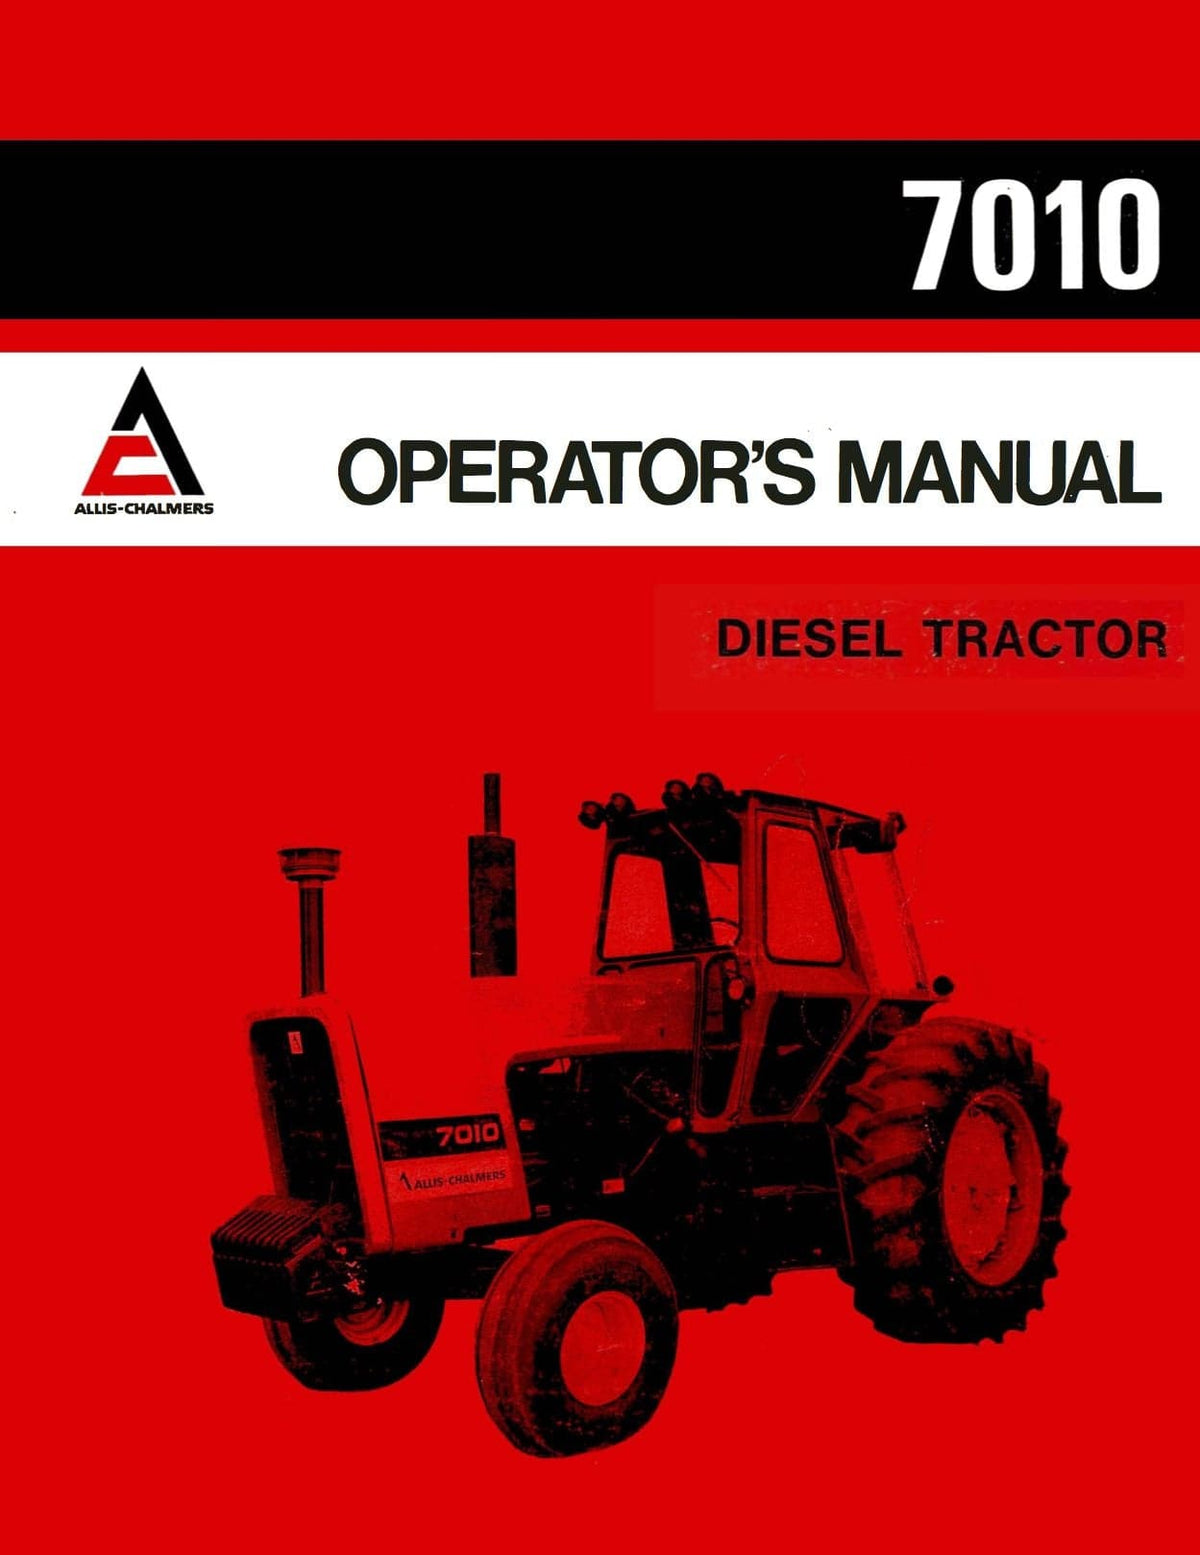 Allis-Chalmers 7010 Diesel Tractor - Operator's Manual - Ag Manuals - A Provider of Digital Farm Manuals - 1